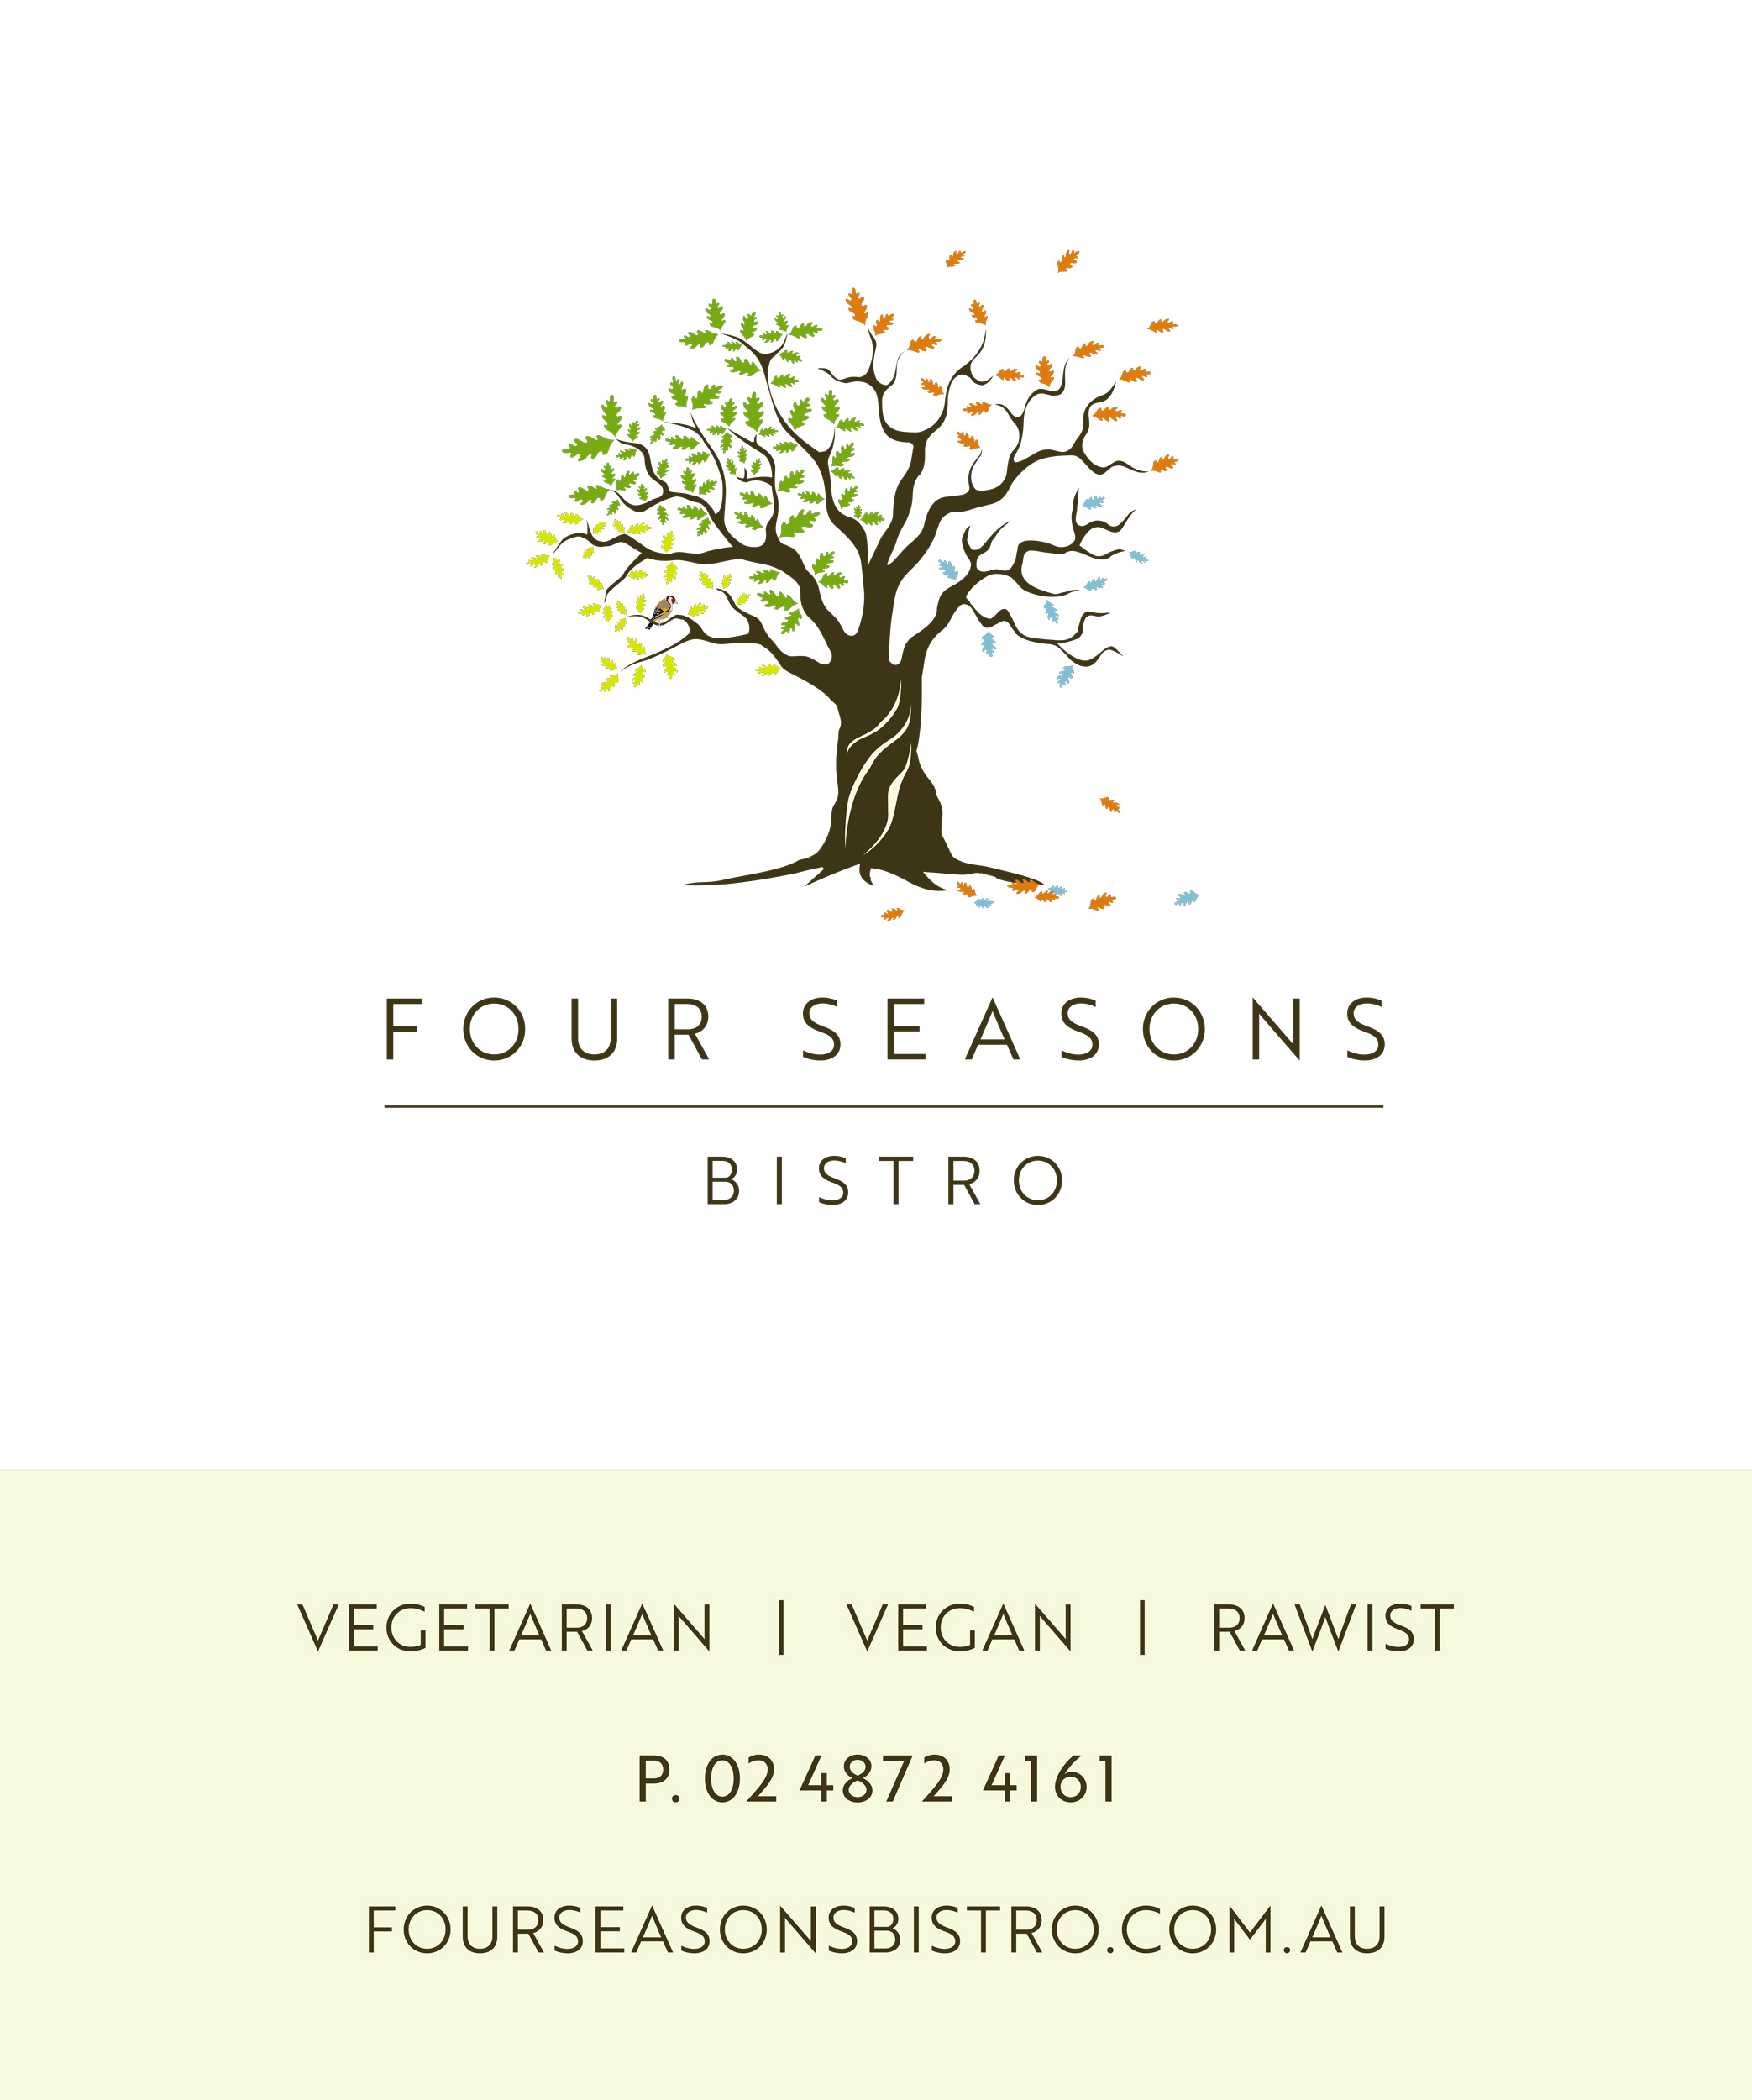 Window Sign for Four Seasons Bistro